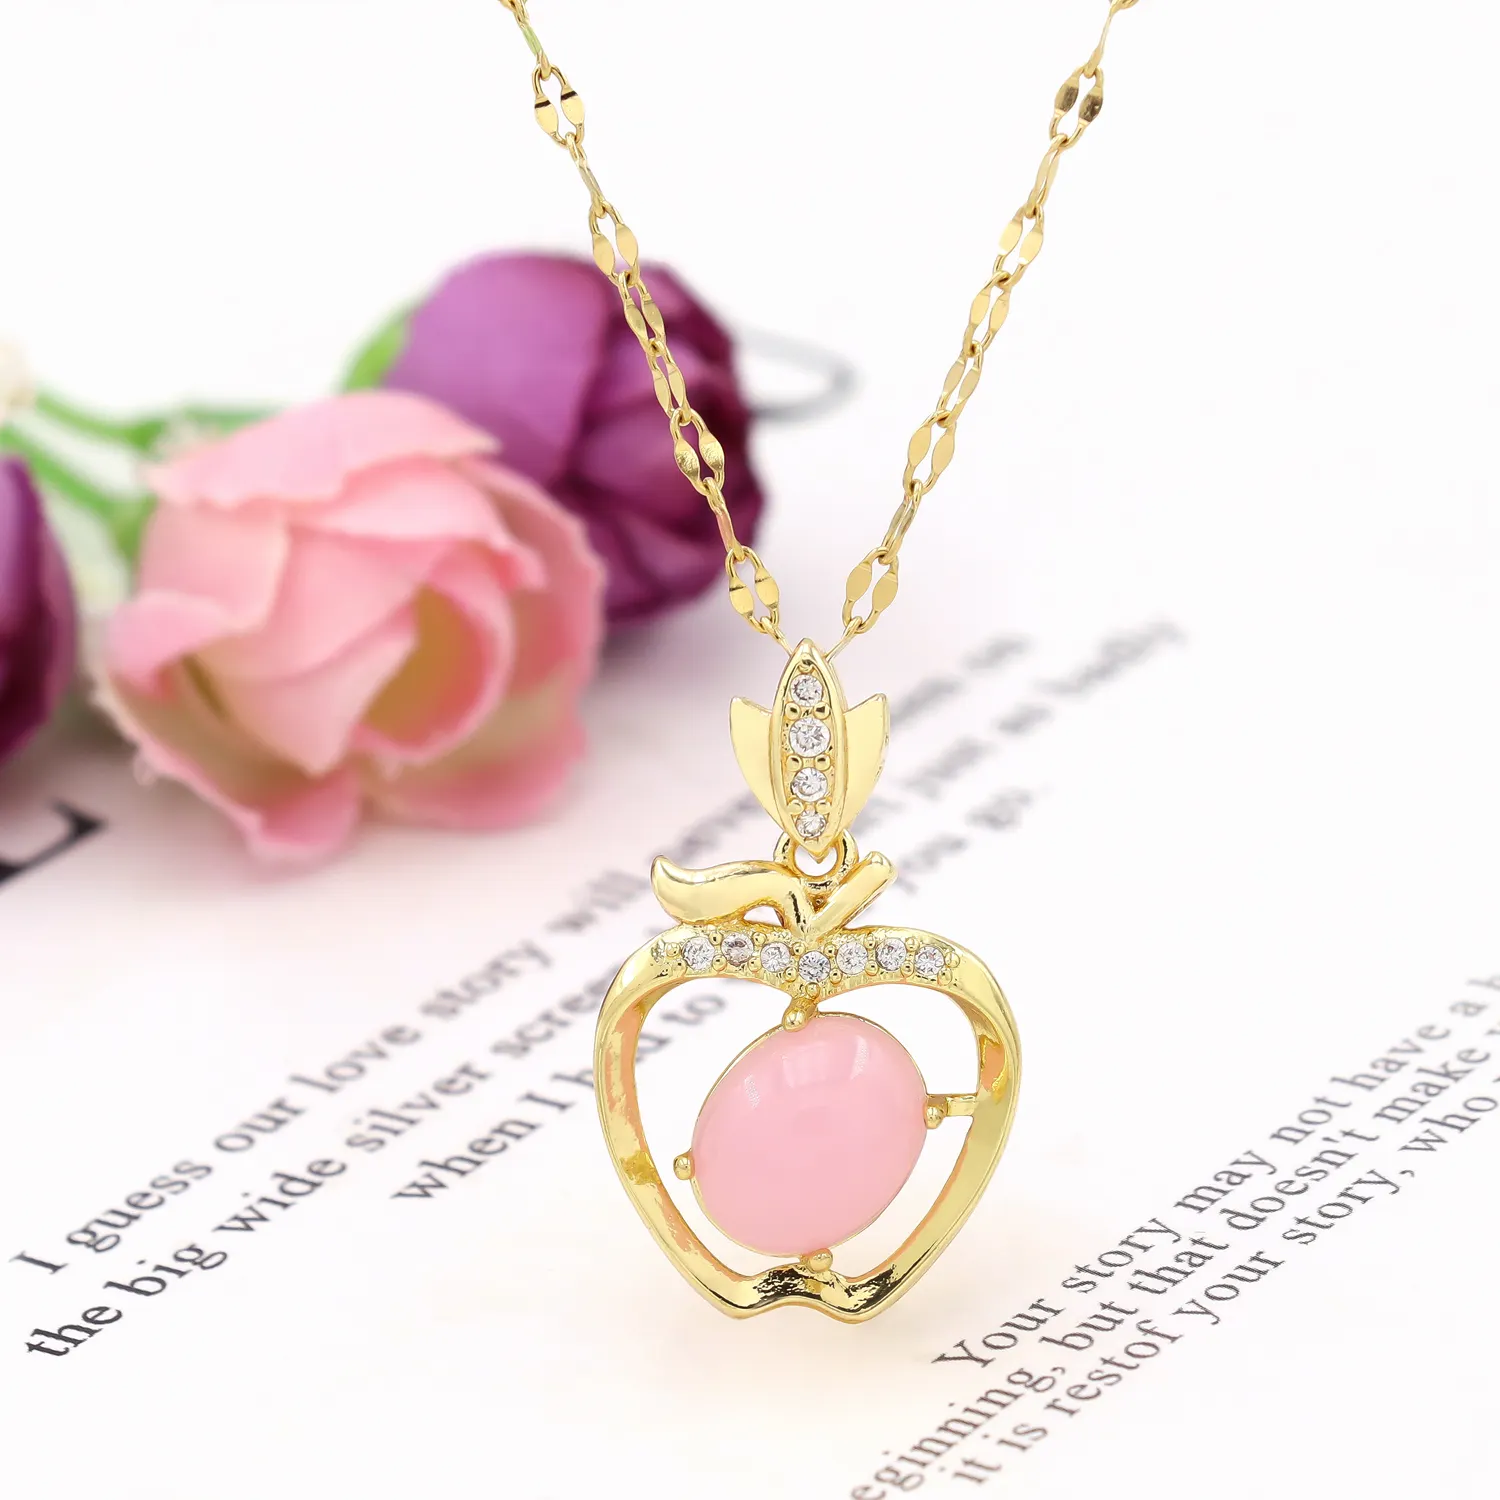 Fashion Jewelry 14K Gold Plated Apple Drop Pendant Necklace with Colorful Stone Cubic Zirconia for Wedding Party Gifts